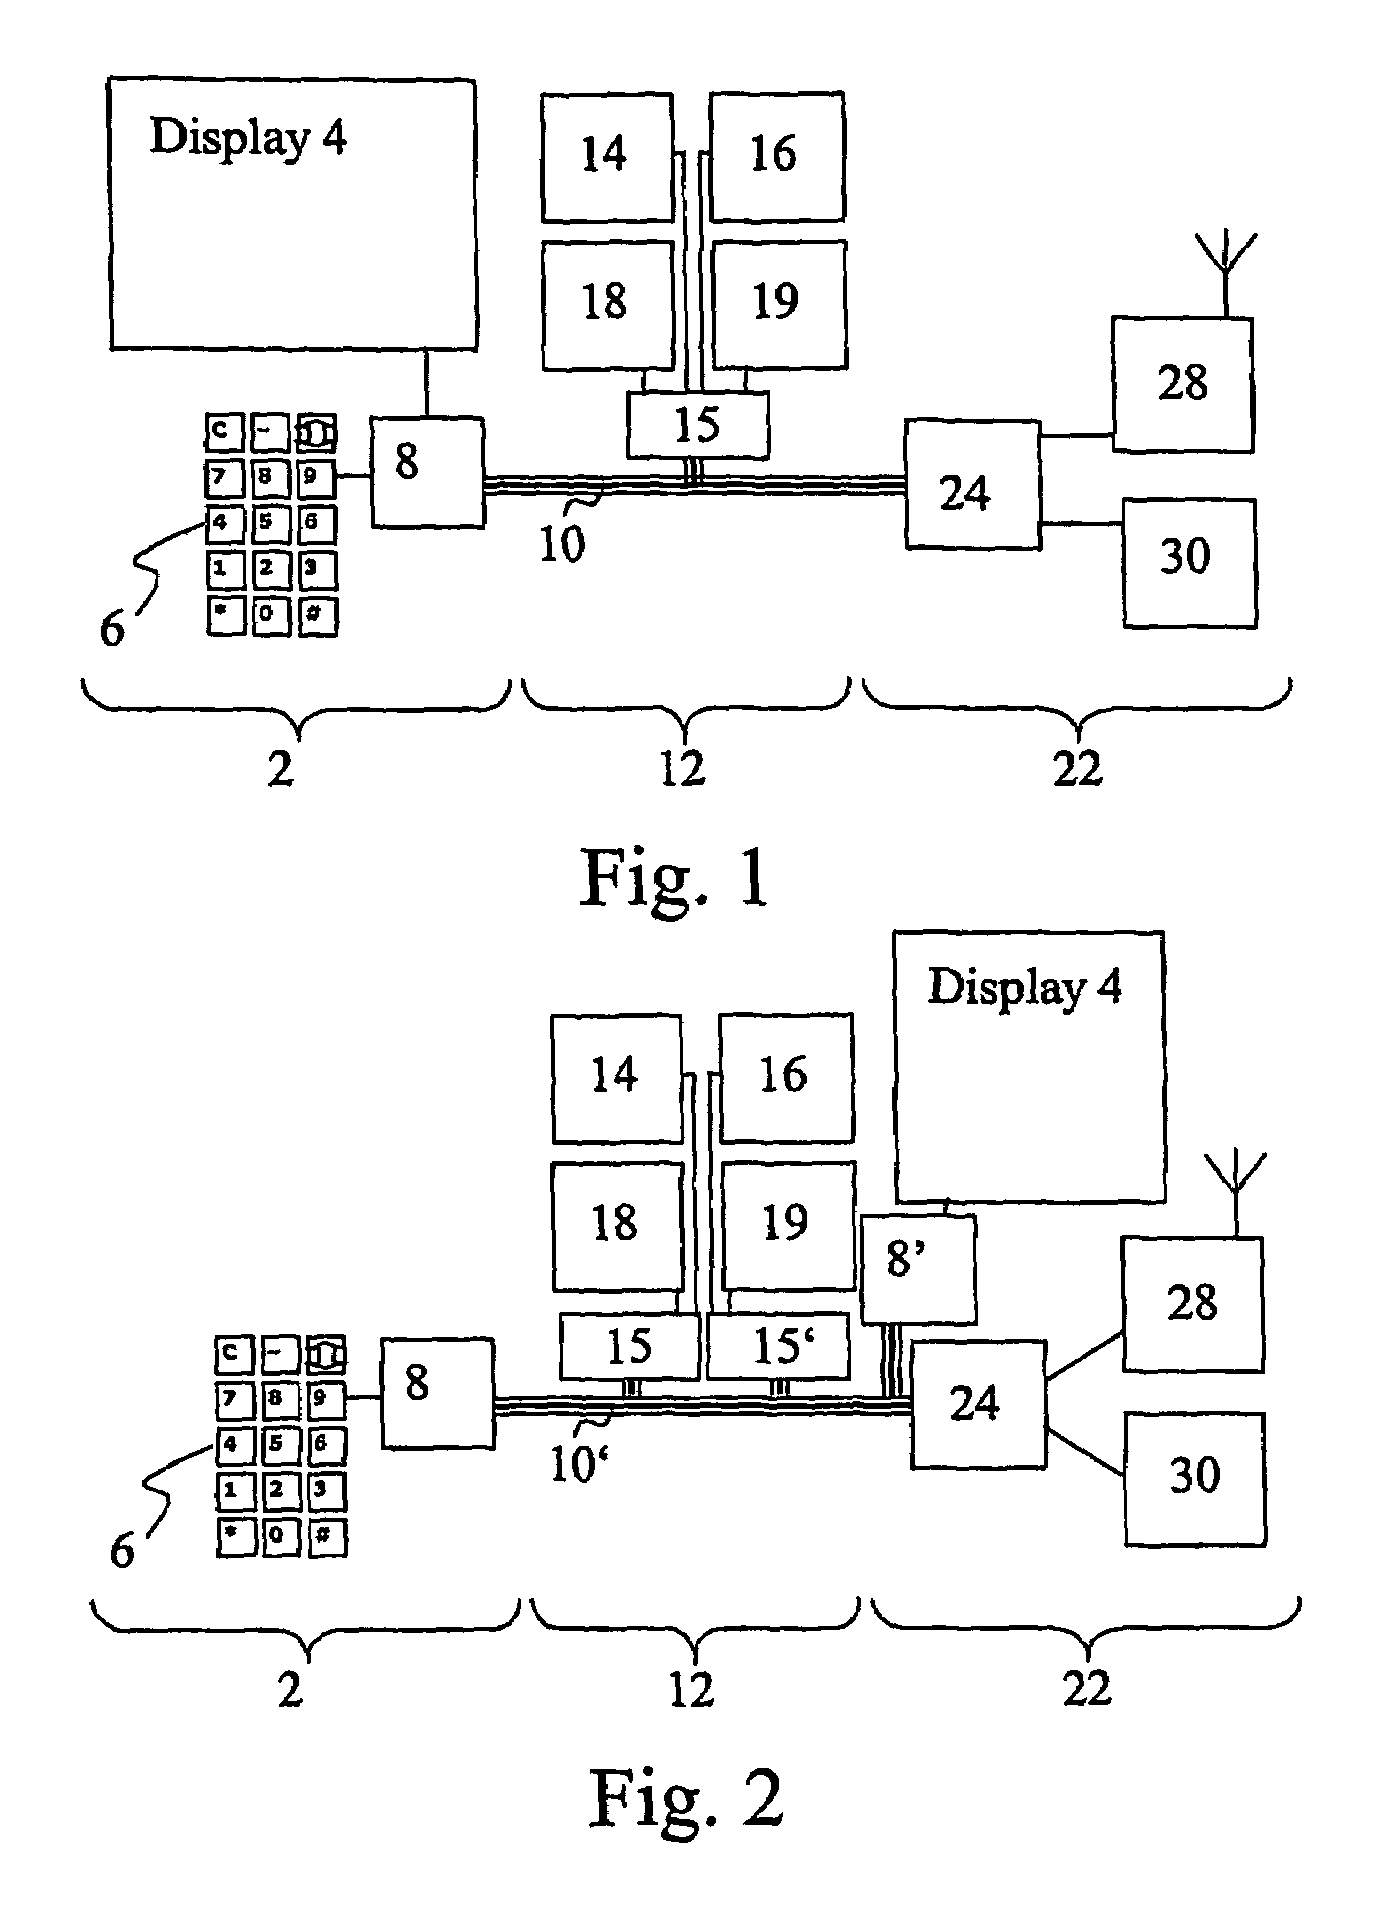 Mobile communication device cover and method for its operation